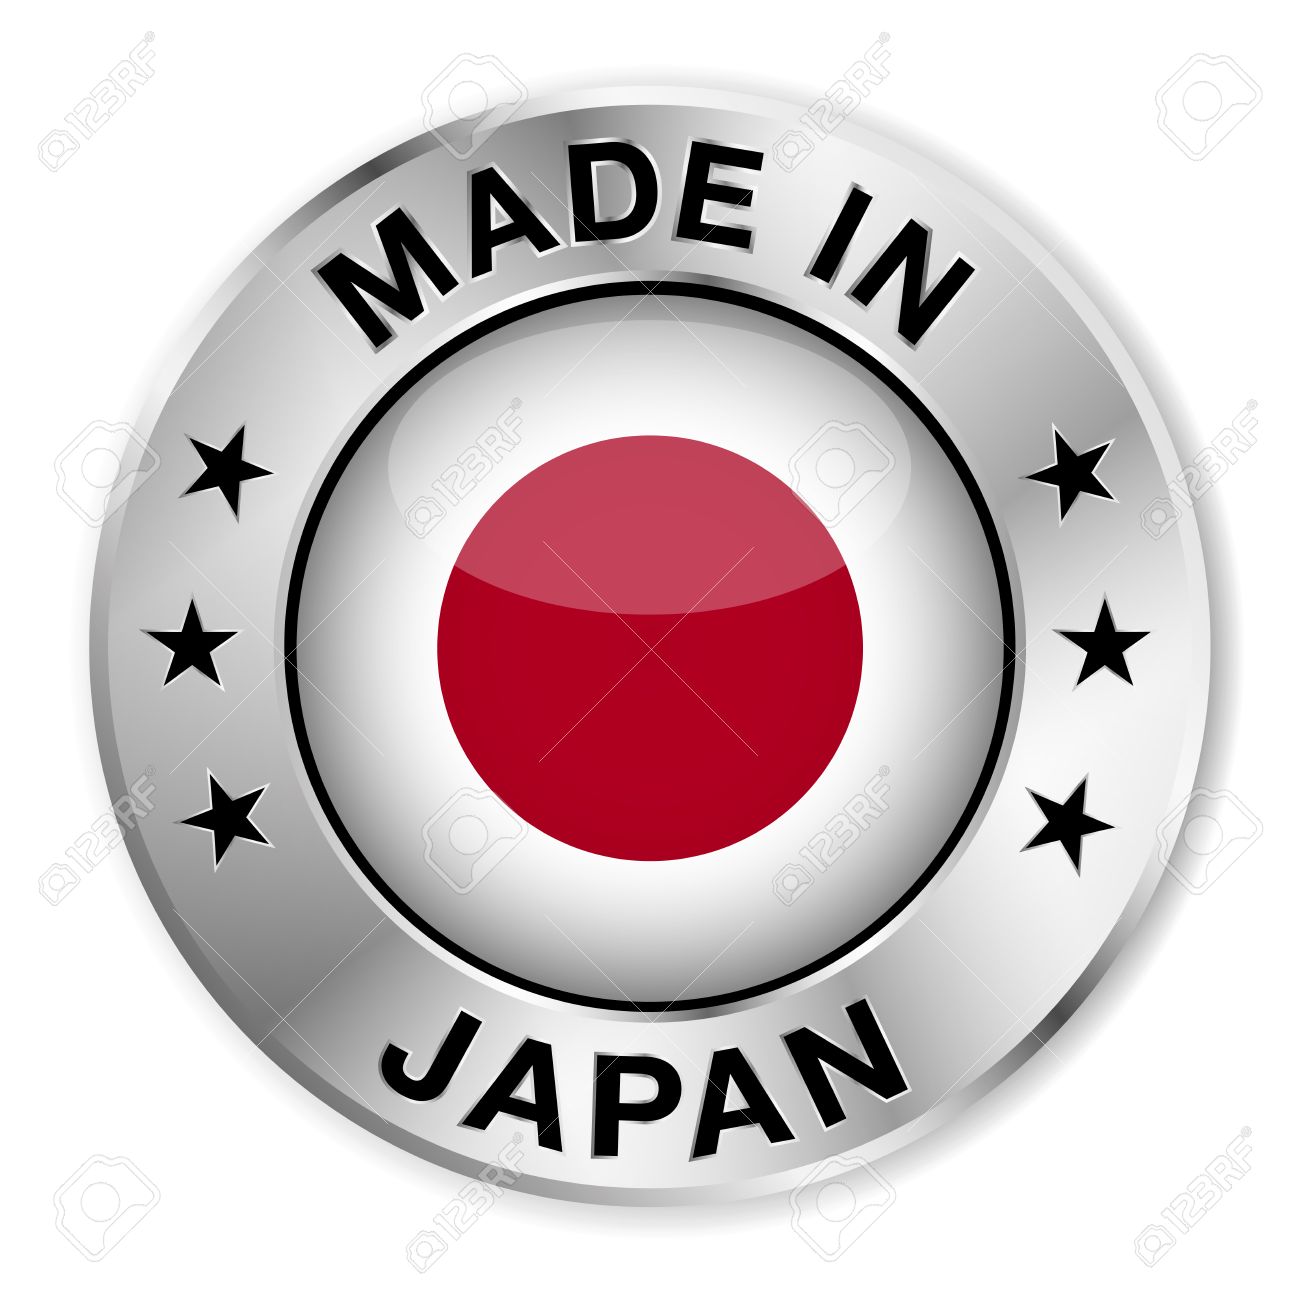 27087599-made-in-japan-silver-badge-and-icon-with-central-glossy-japanese-flag-symbol-and-stars